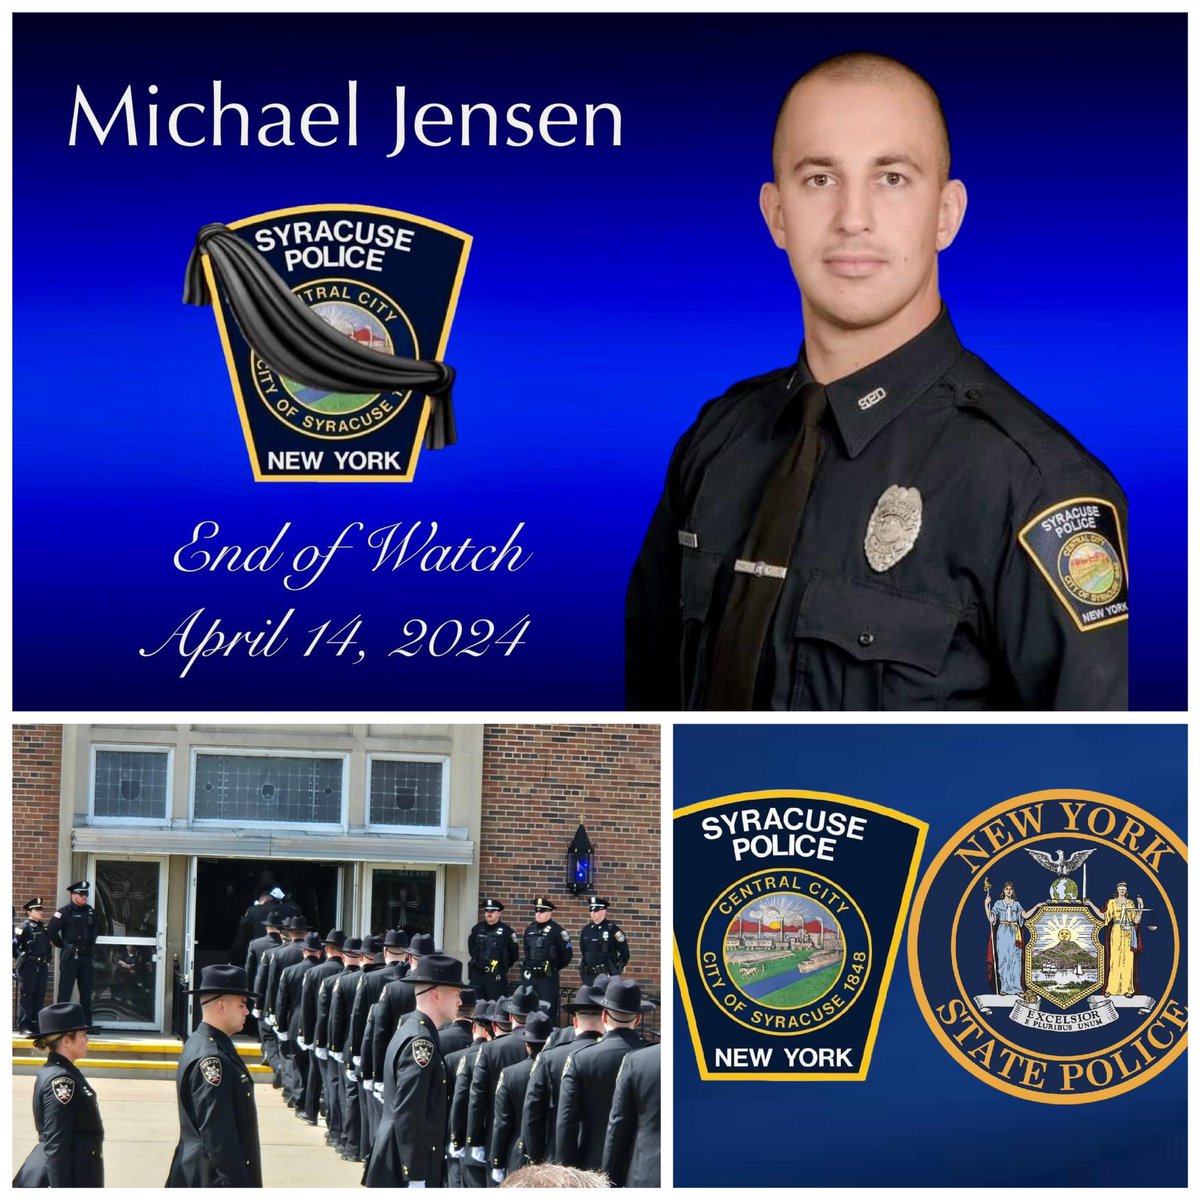 Thank you @nyspolice who provided emergency police services in the City of Syracuse, Friday, April 19th, 2024 through Sunday, April 21st, 2024. This allowed the @SyracusePolice to ensure their officers could honor and support fallen Police Officer Michael Jensen, and his family.